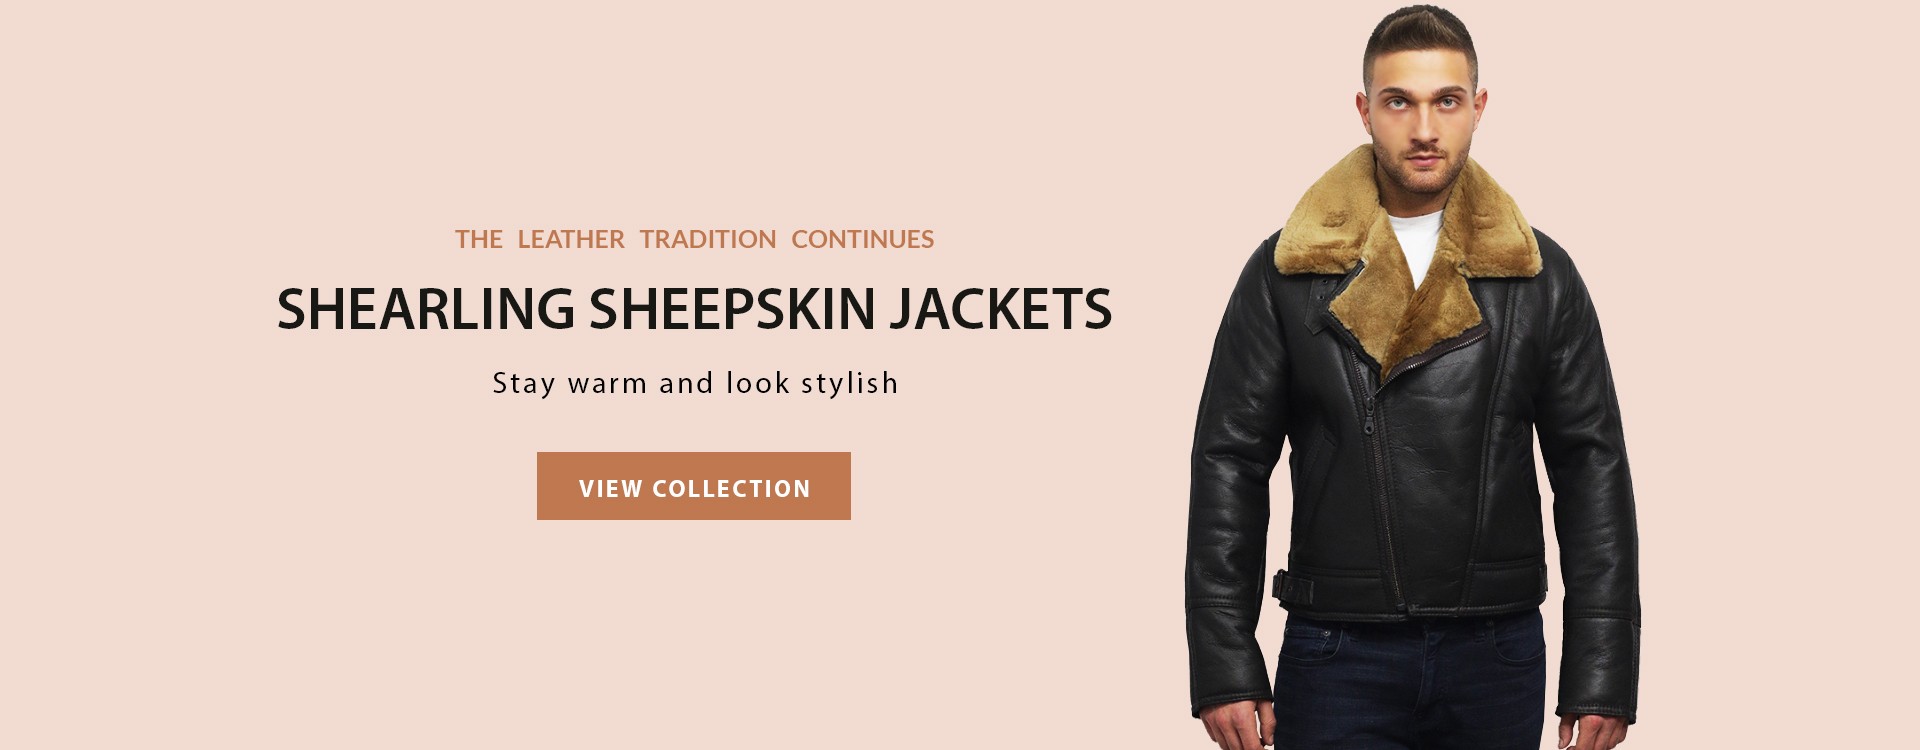 Online Retail Store for Leather Jackets and Fashionable Accessories ...